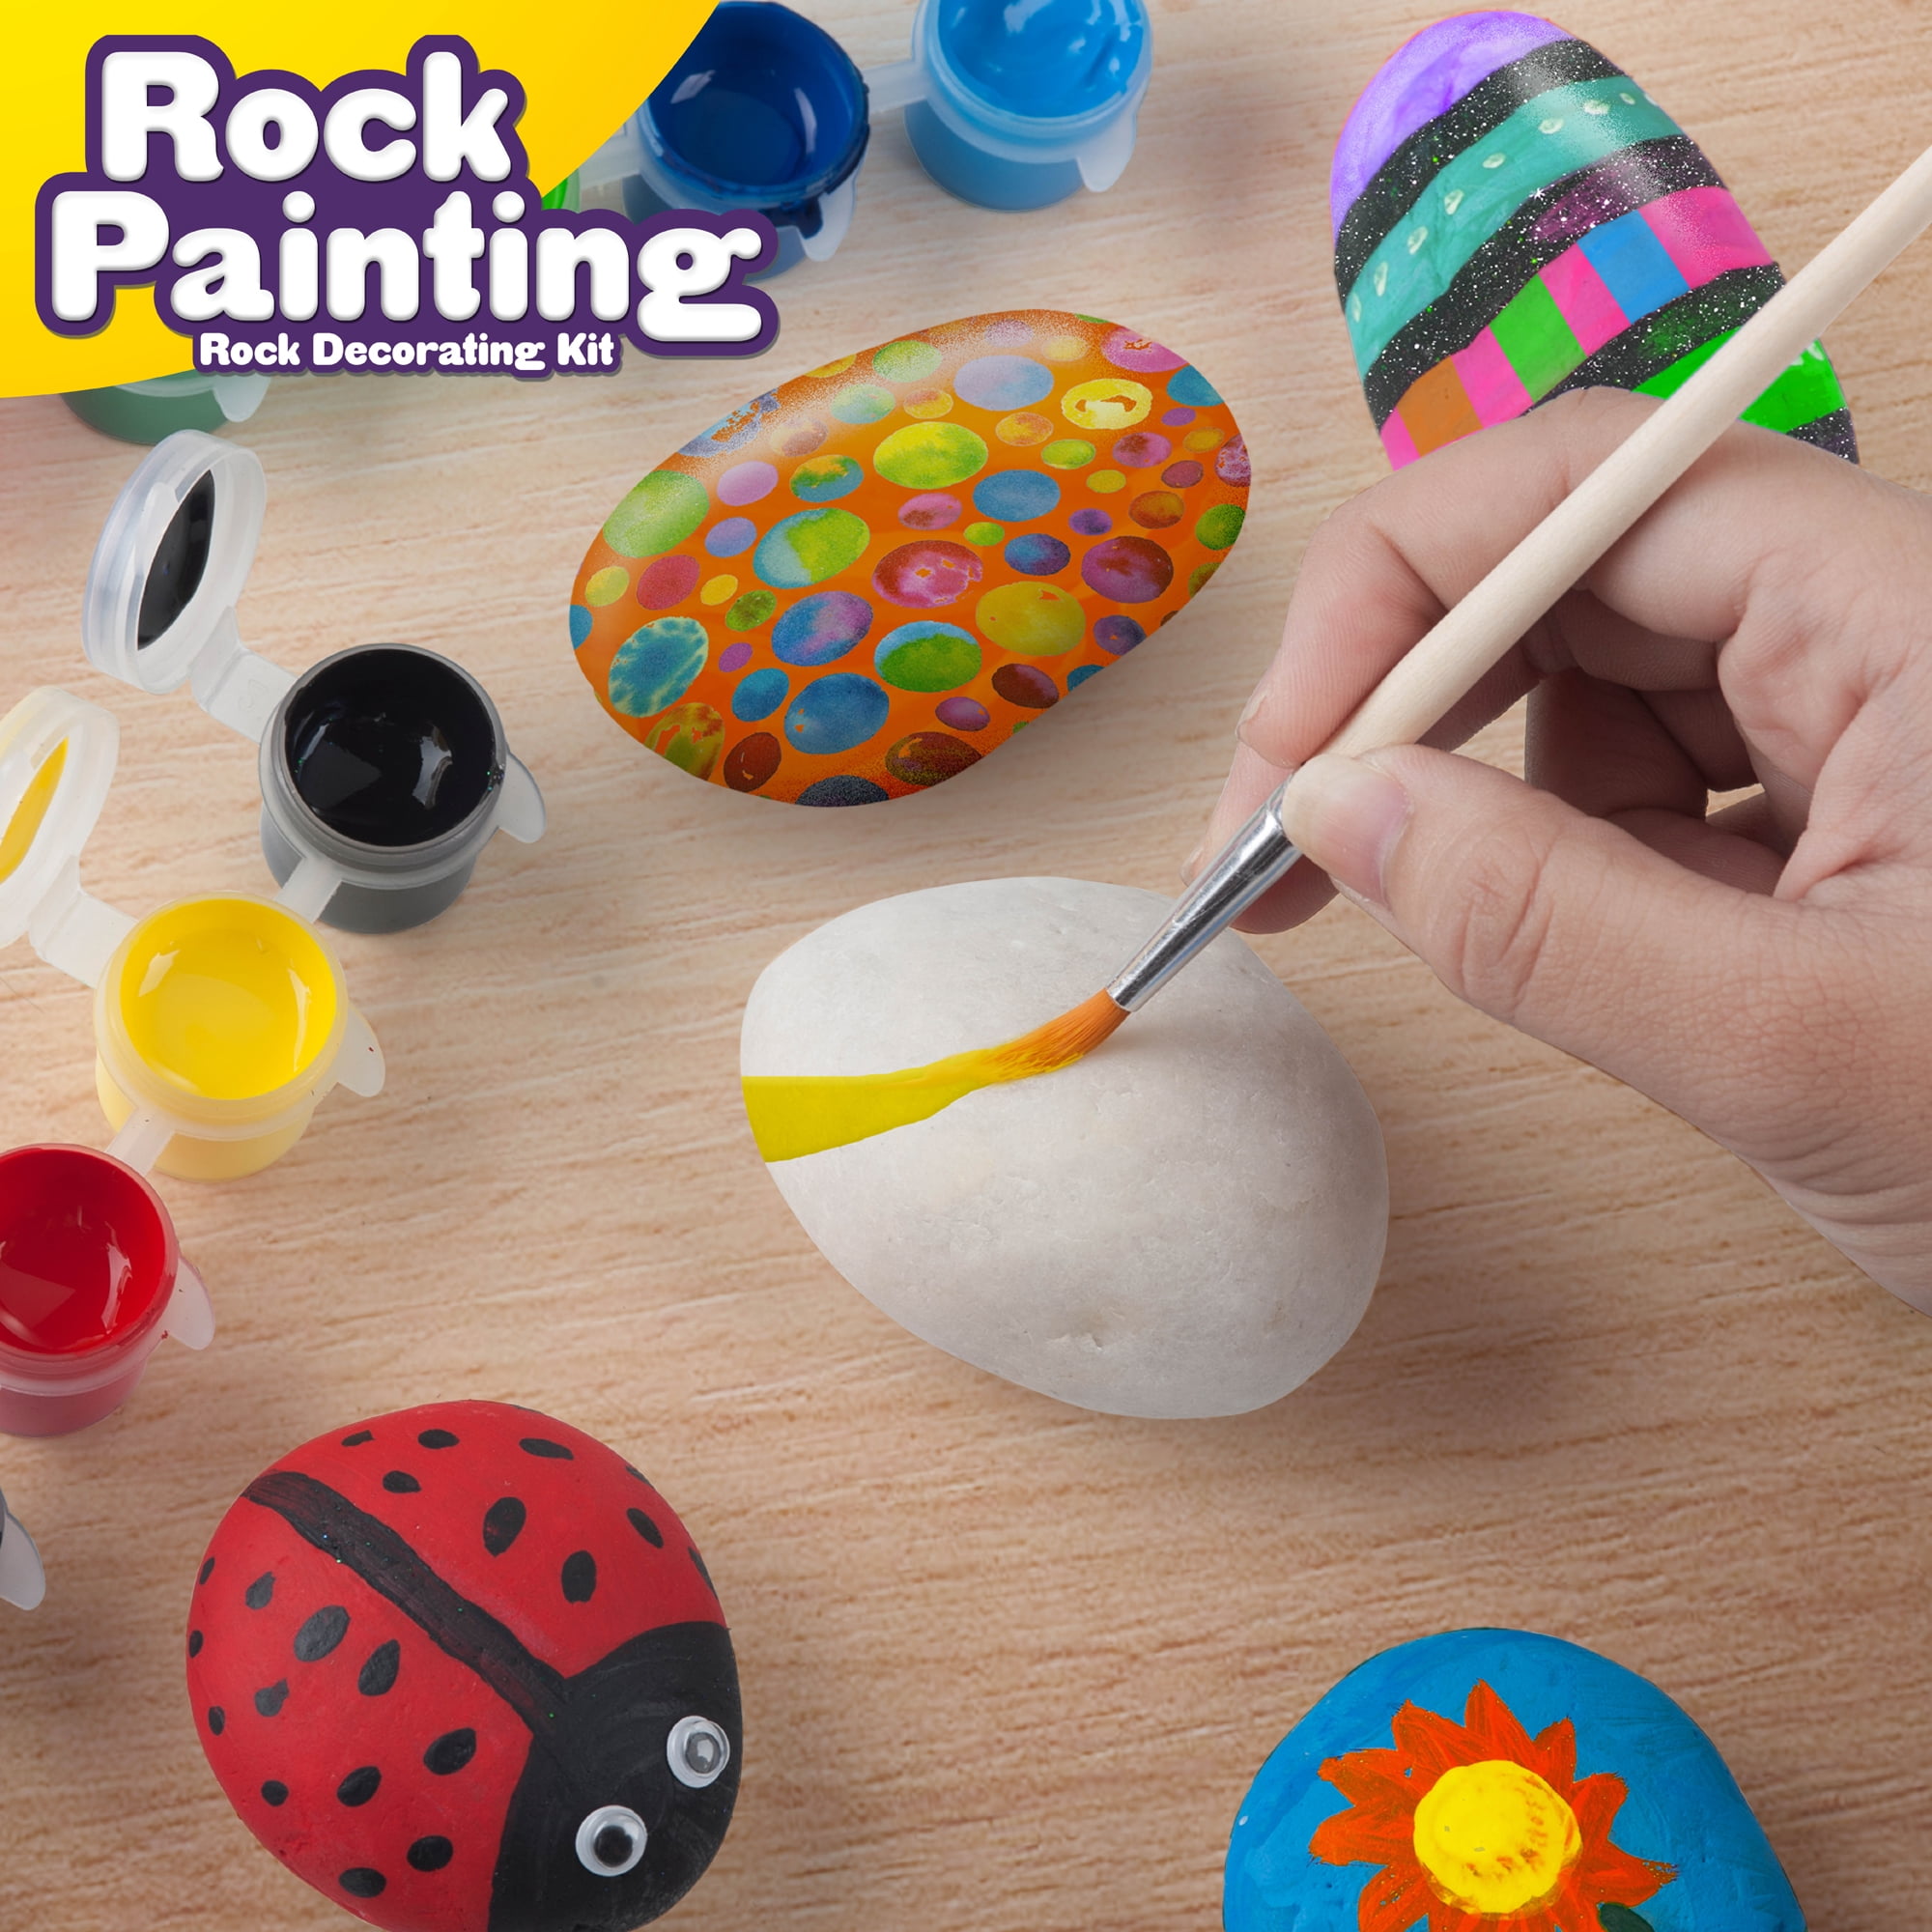 12 Rock Painting Kit, 43 Pcs Arts and Crafts for Kids Ages 6-8+